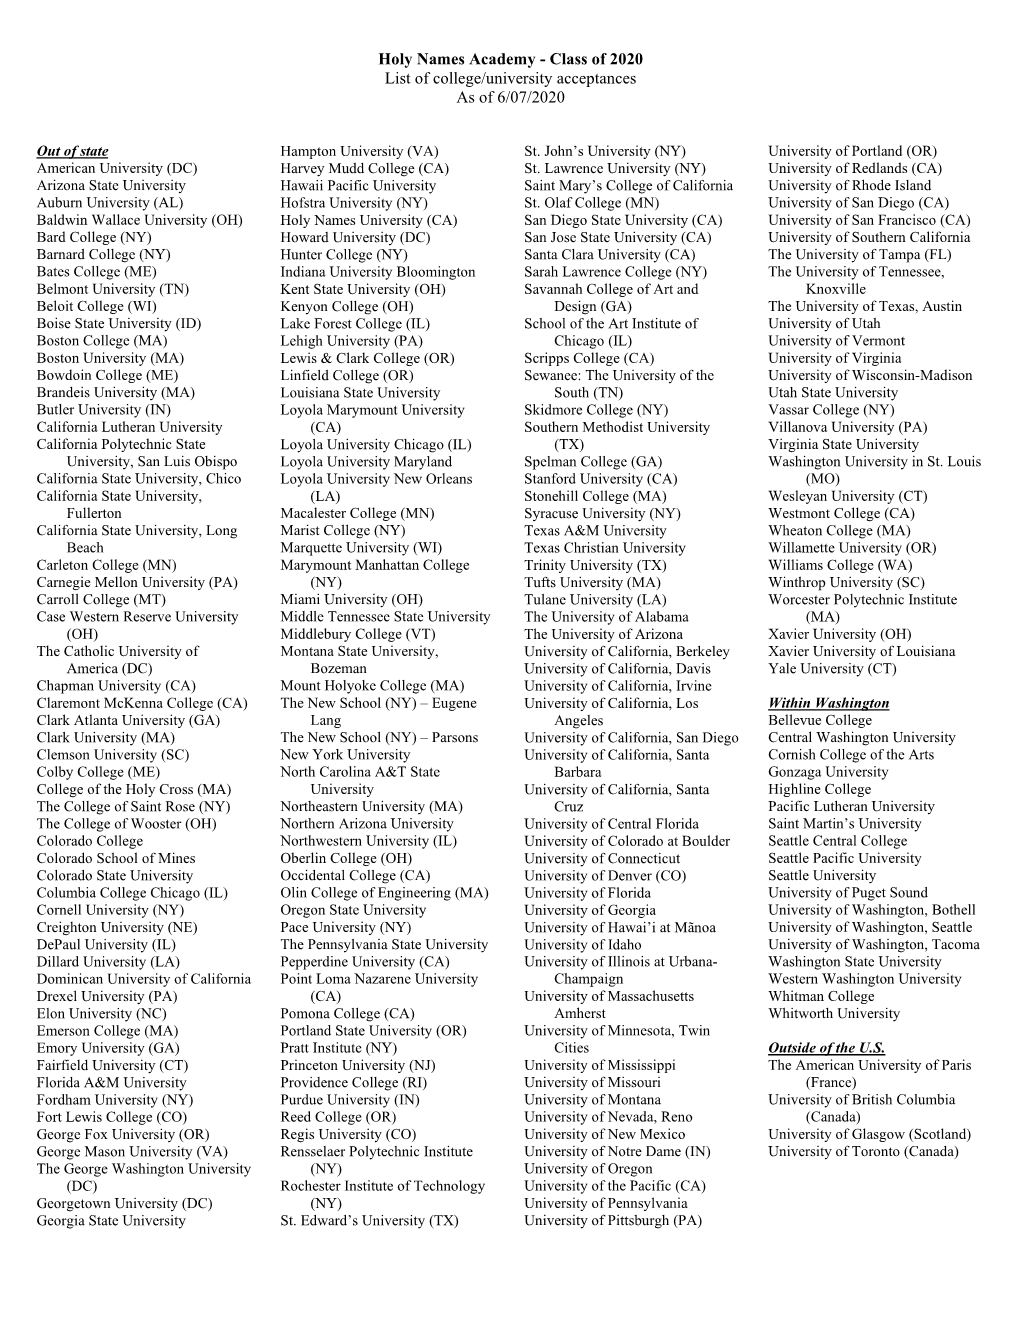 HNA Class of 2020 List of College Acceptances